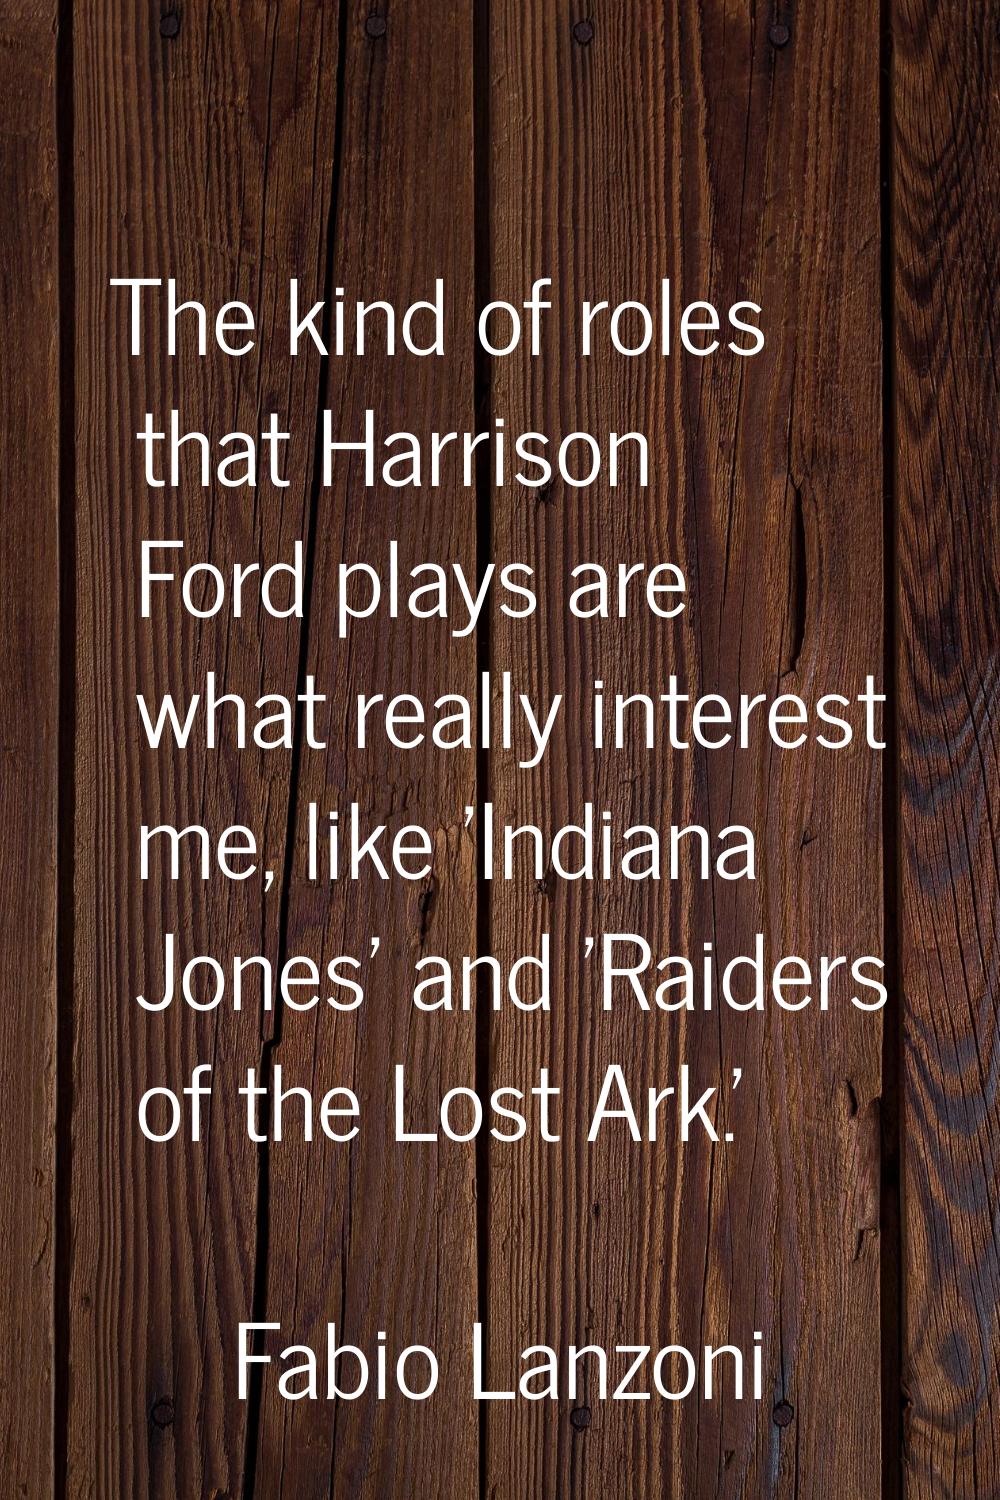 The kind of roles that Harrison Ford plays are what really interest me, like 'Indiana Jones' and 'R